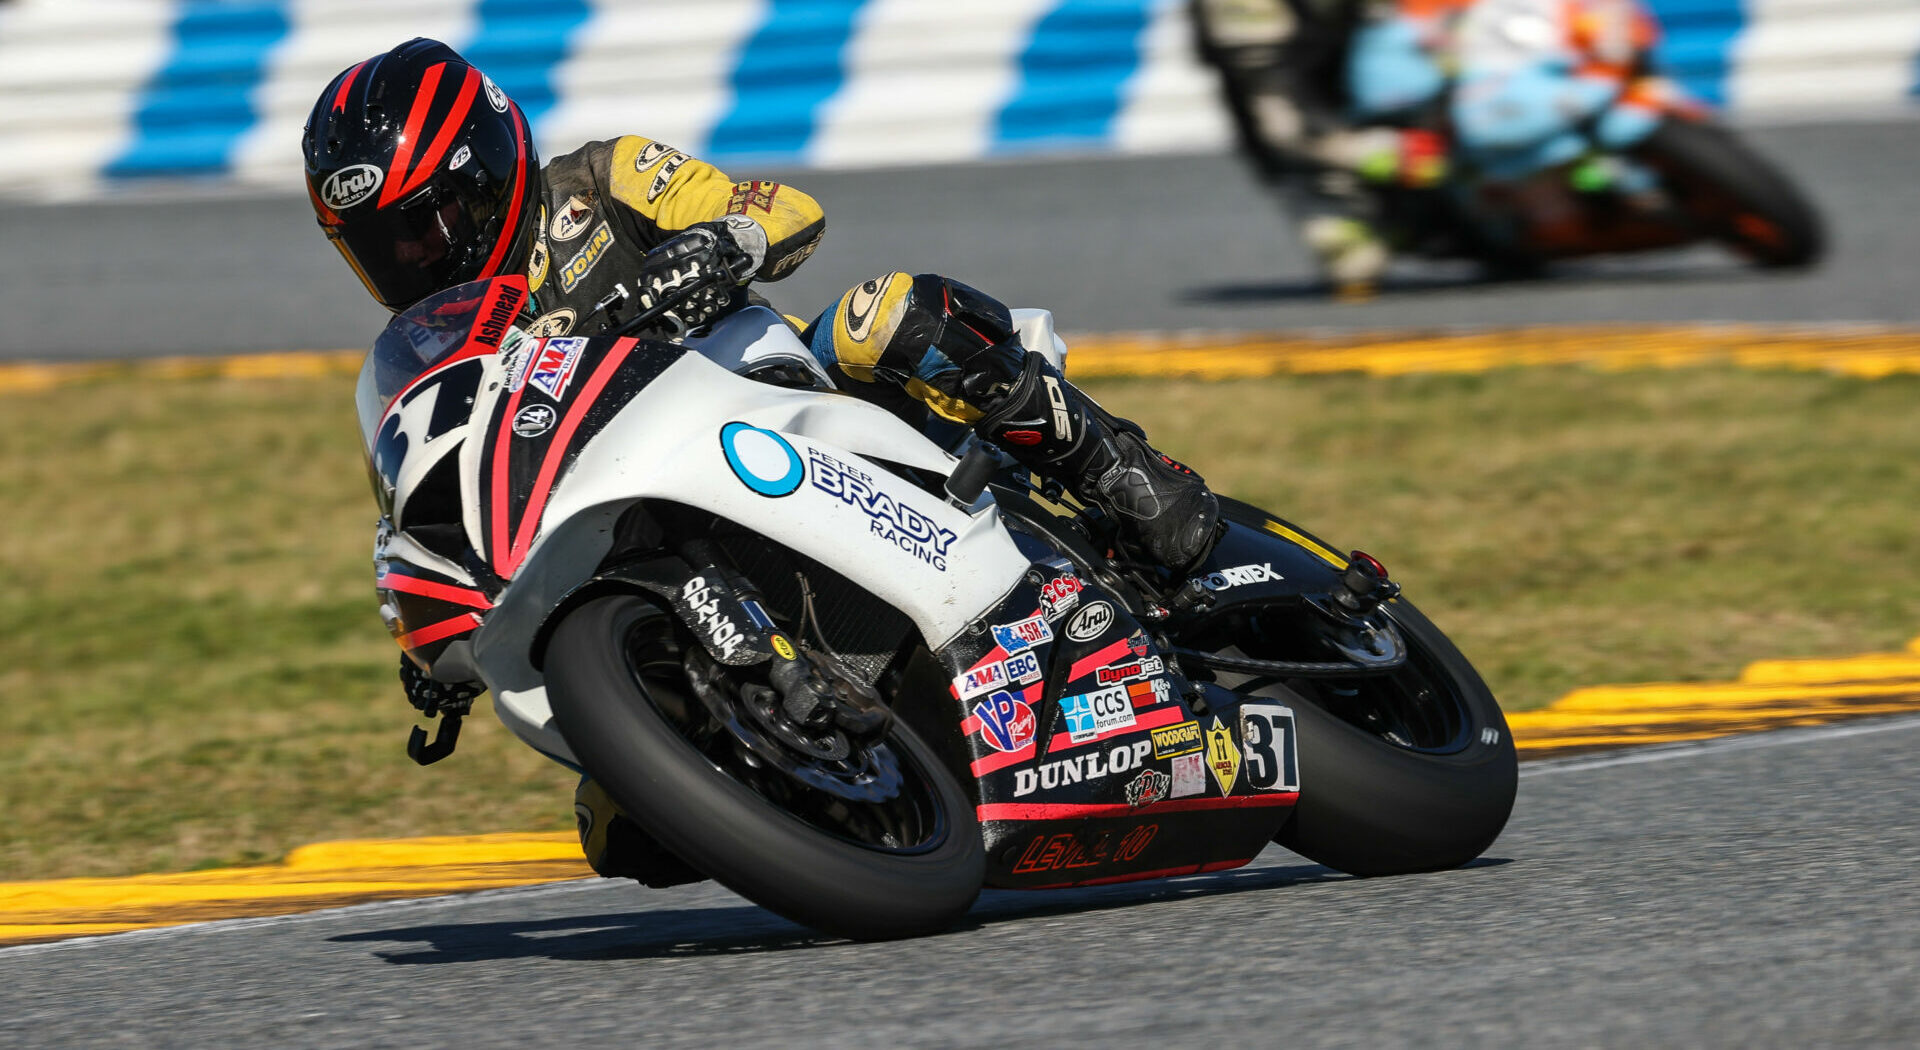 John Ashmead (37) in action during the 2021 Daytona 200. Photo by Brian J. Nelson.